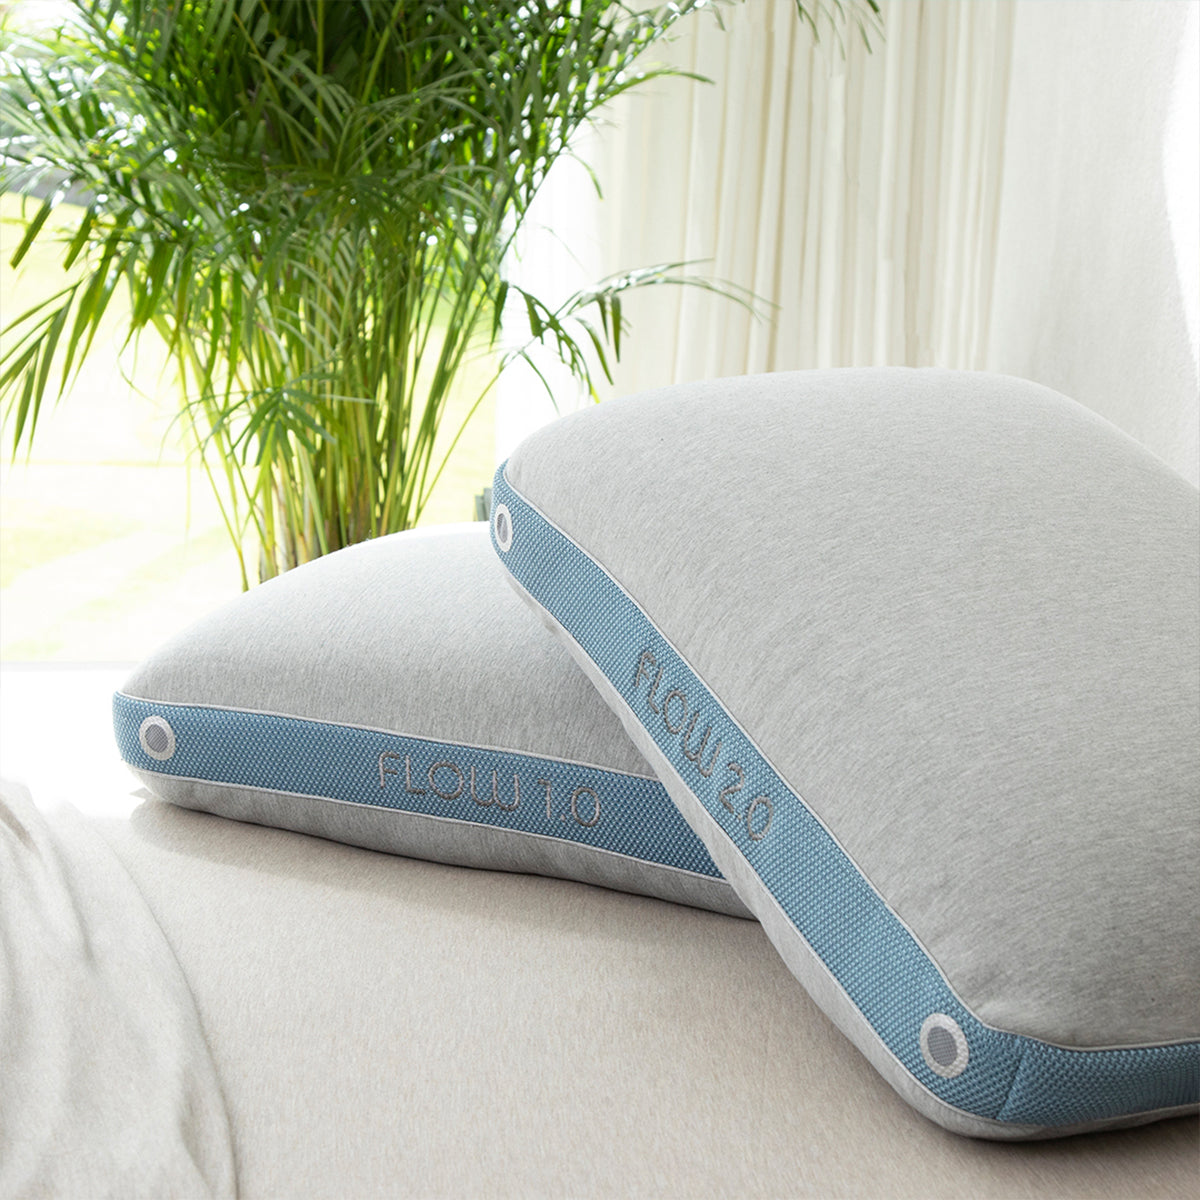 Products Bedgear Flow Performance Pillow 1.0 and 2.0 shown together